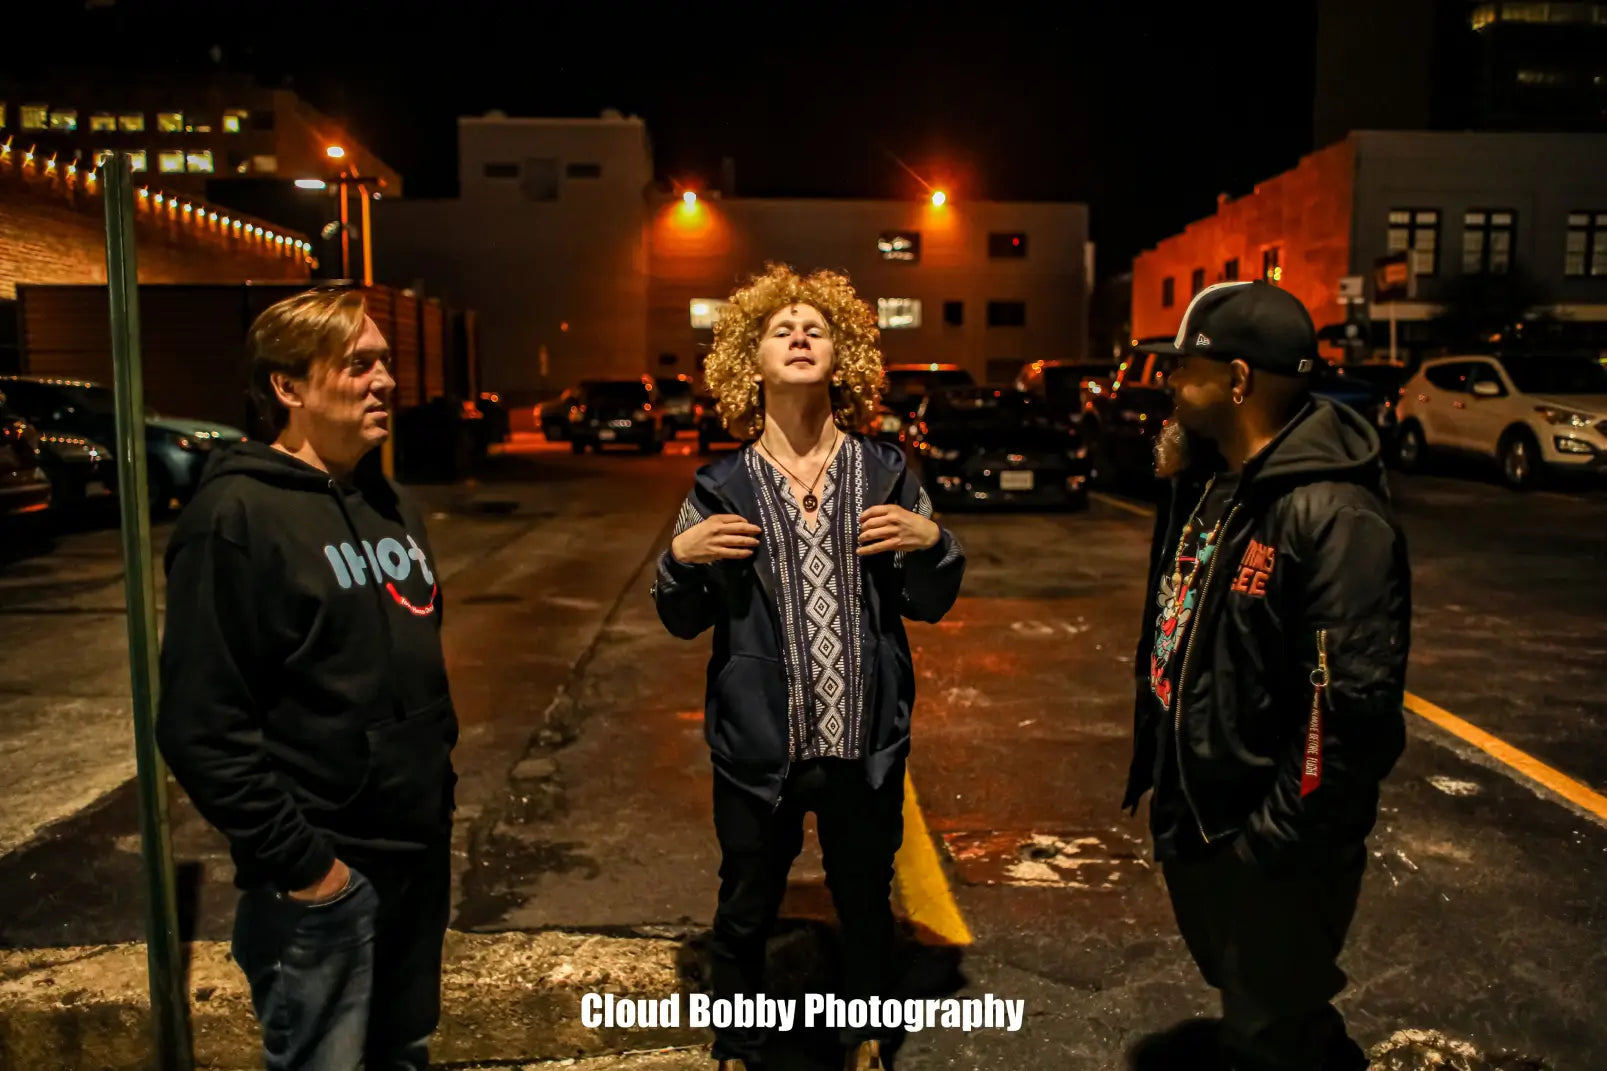 The Isaac Hadden Organ Trio standing in a Roanoke parking lot at night.